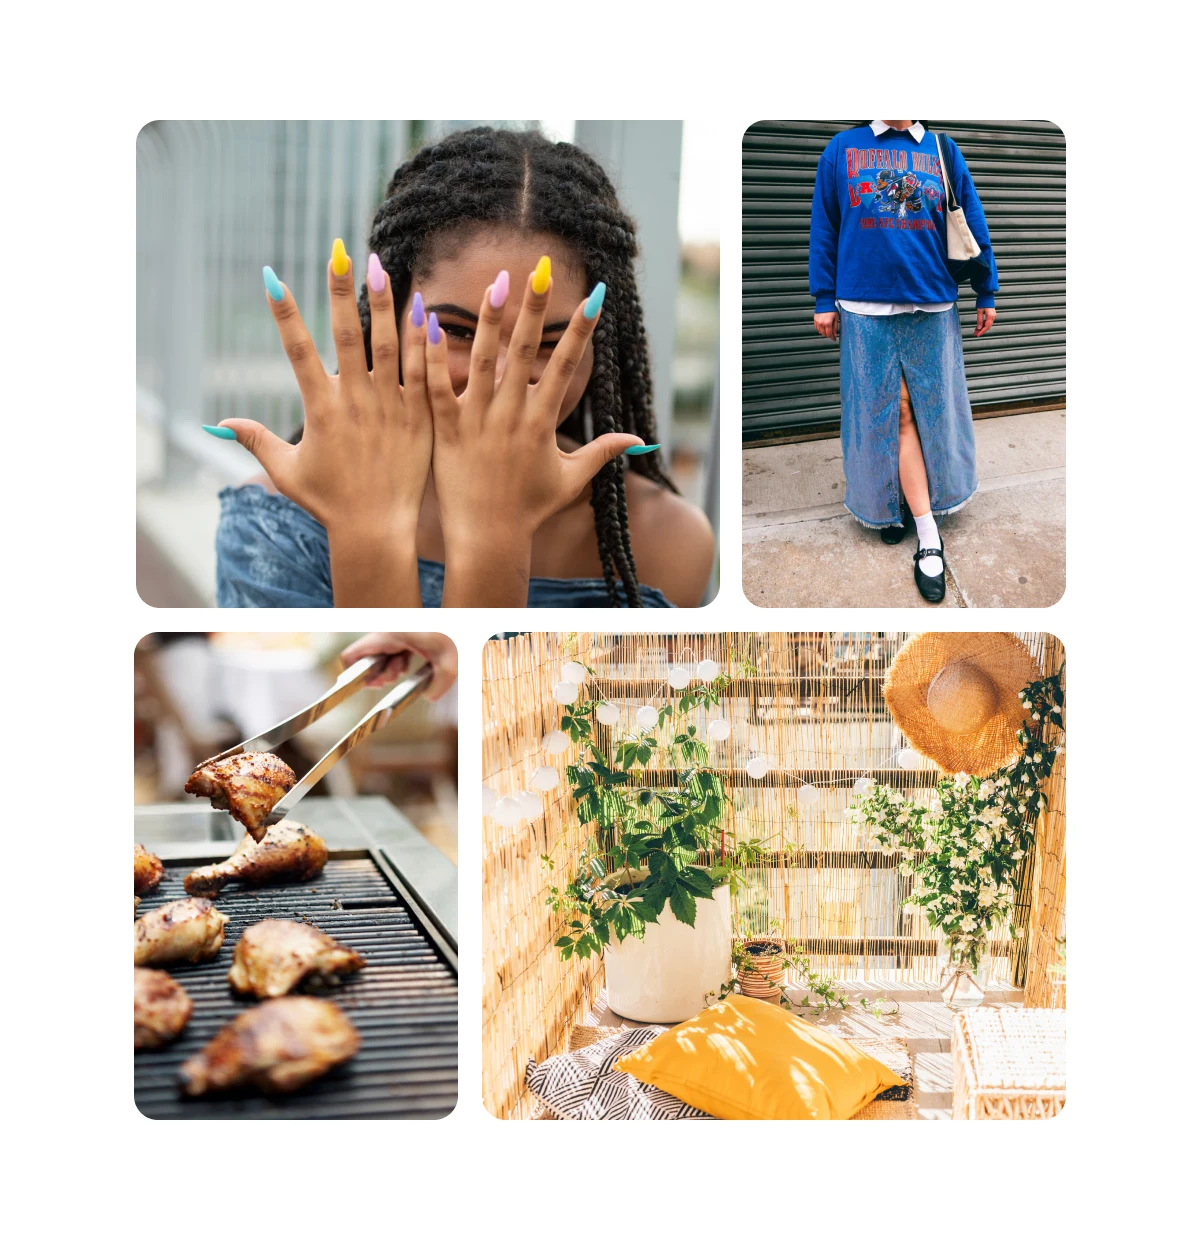  Pin grid featuring colorful pastel nails, dad style fashion, chicken on grill, patio decor.